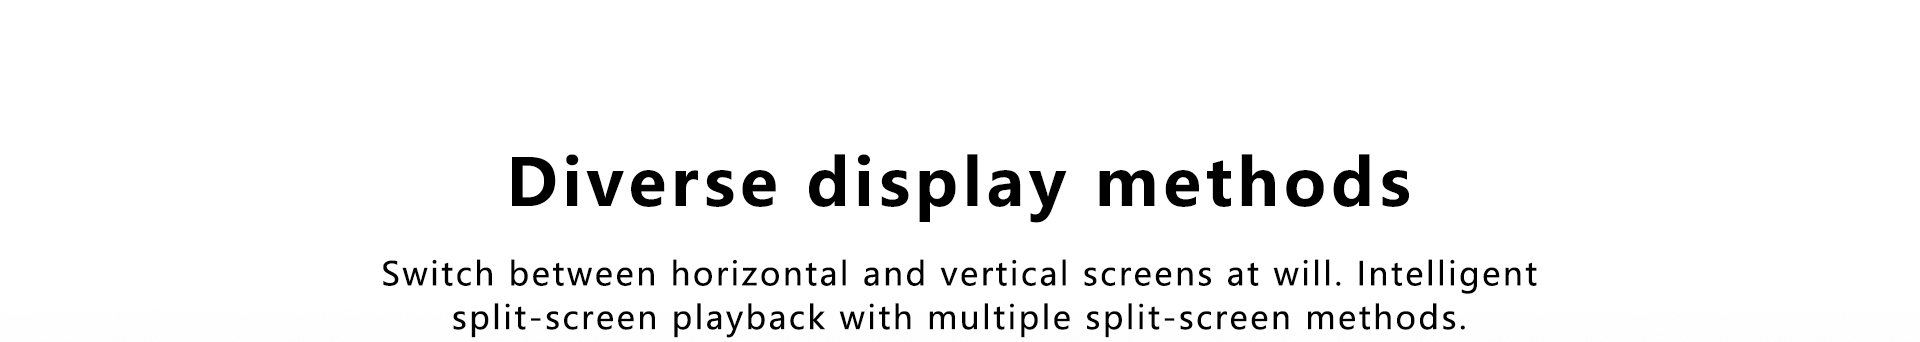 43 inch outdoor highlight 1500nit digital signage advertising machine